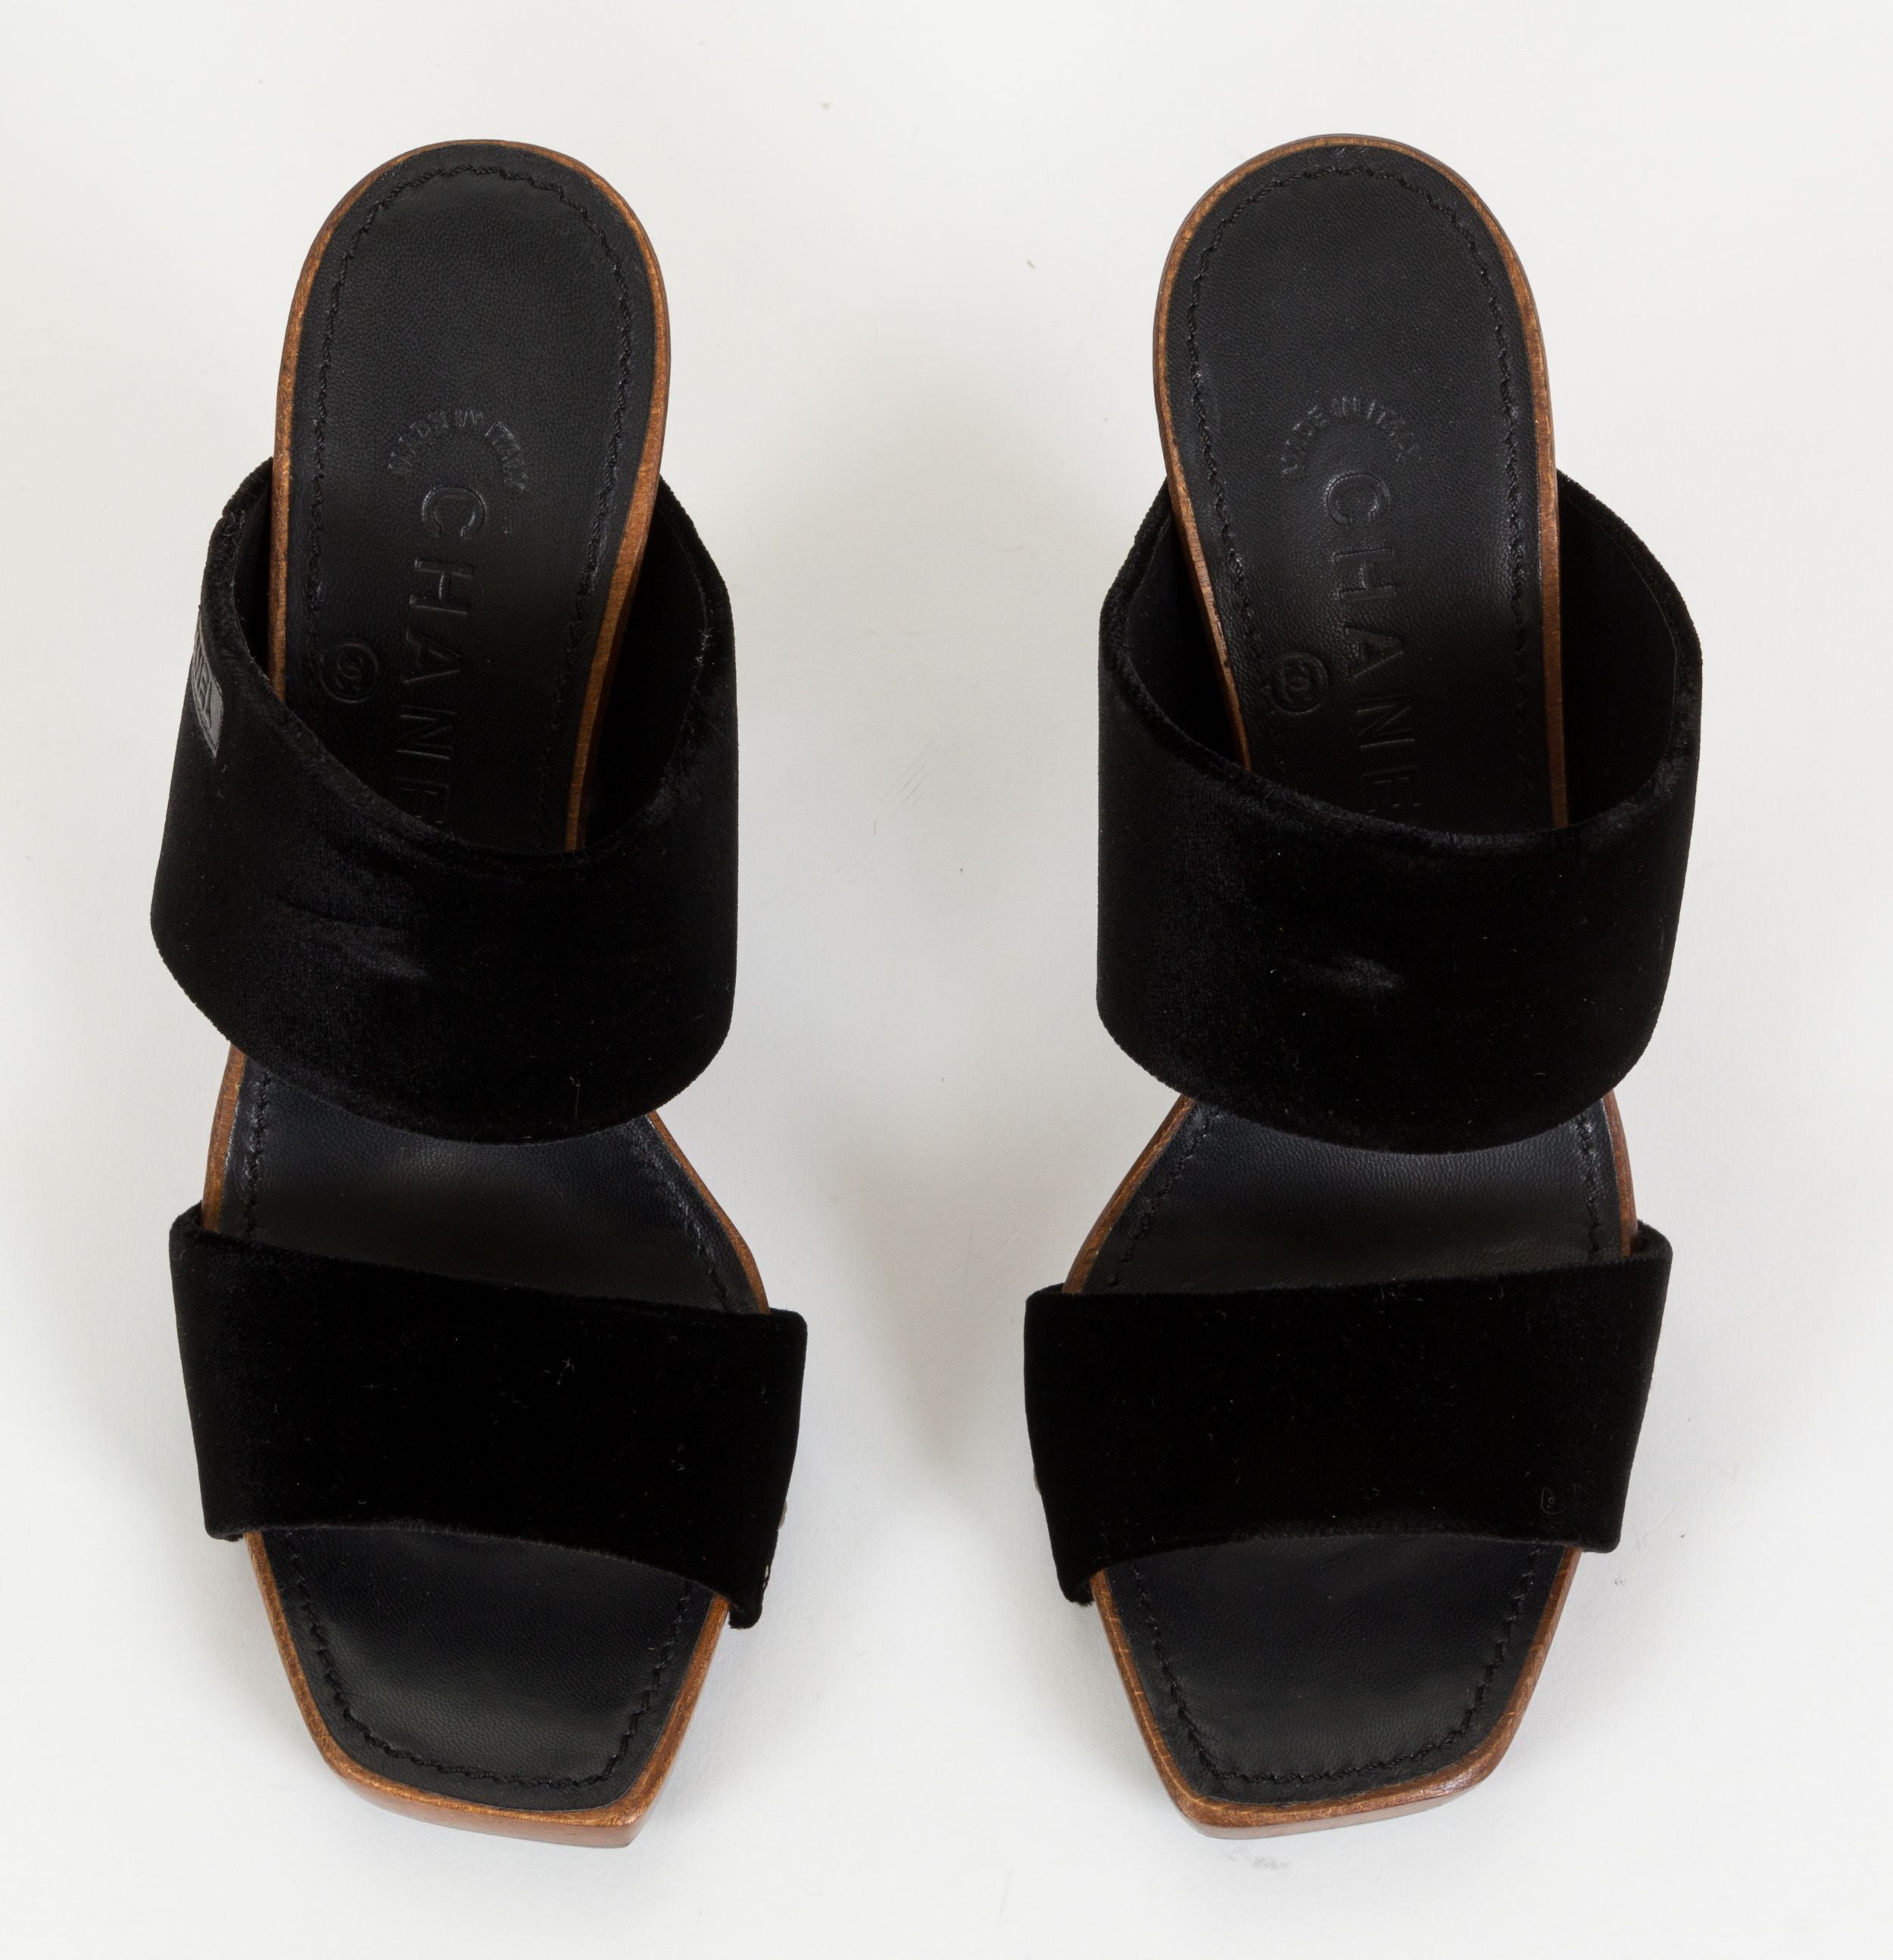 Real Mink Chanel Style Slides for Sale in East Rutherford, NJ - OfferUp